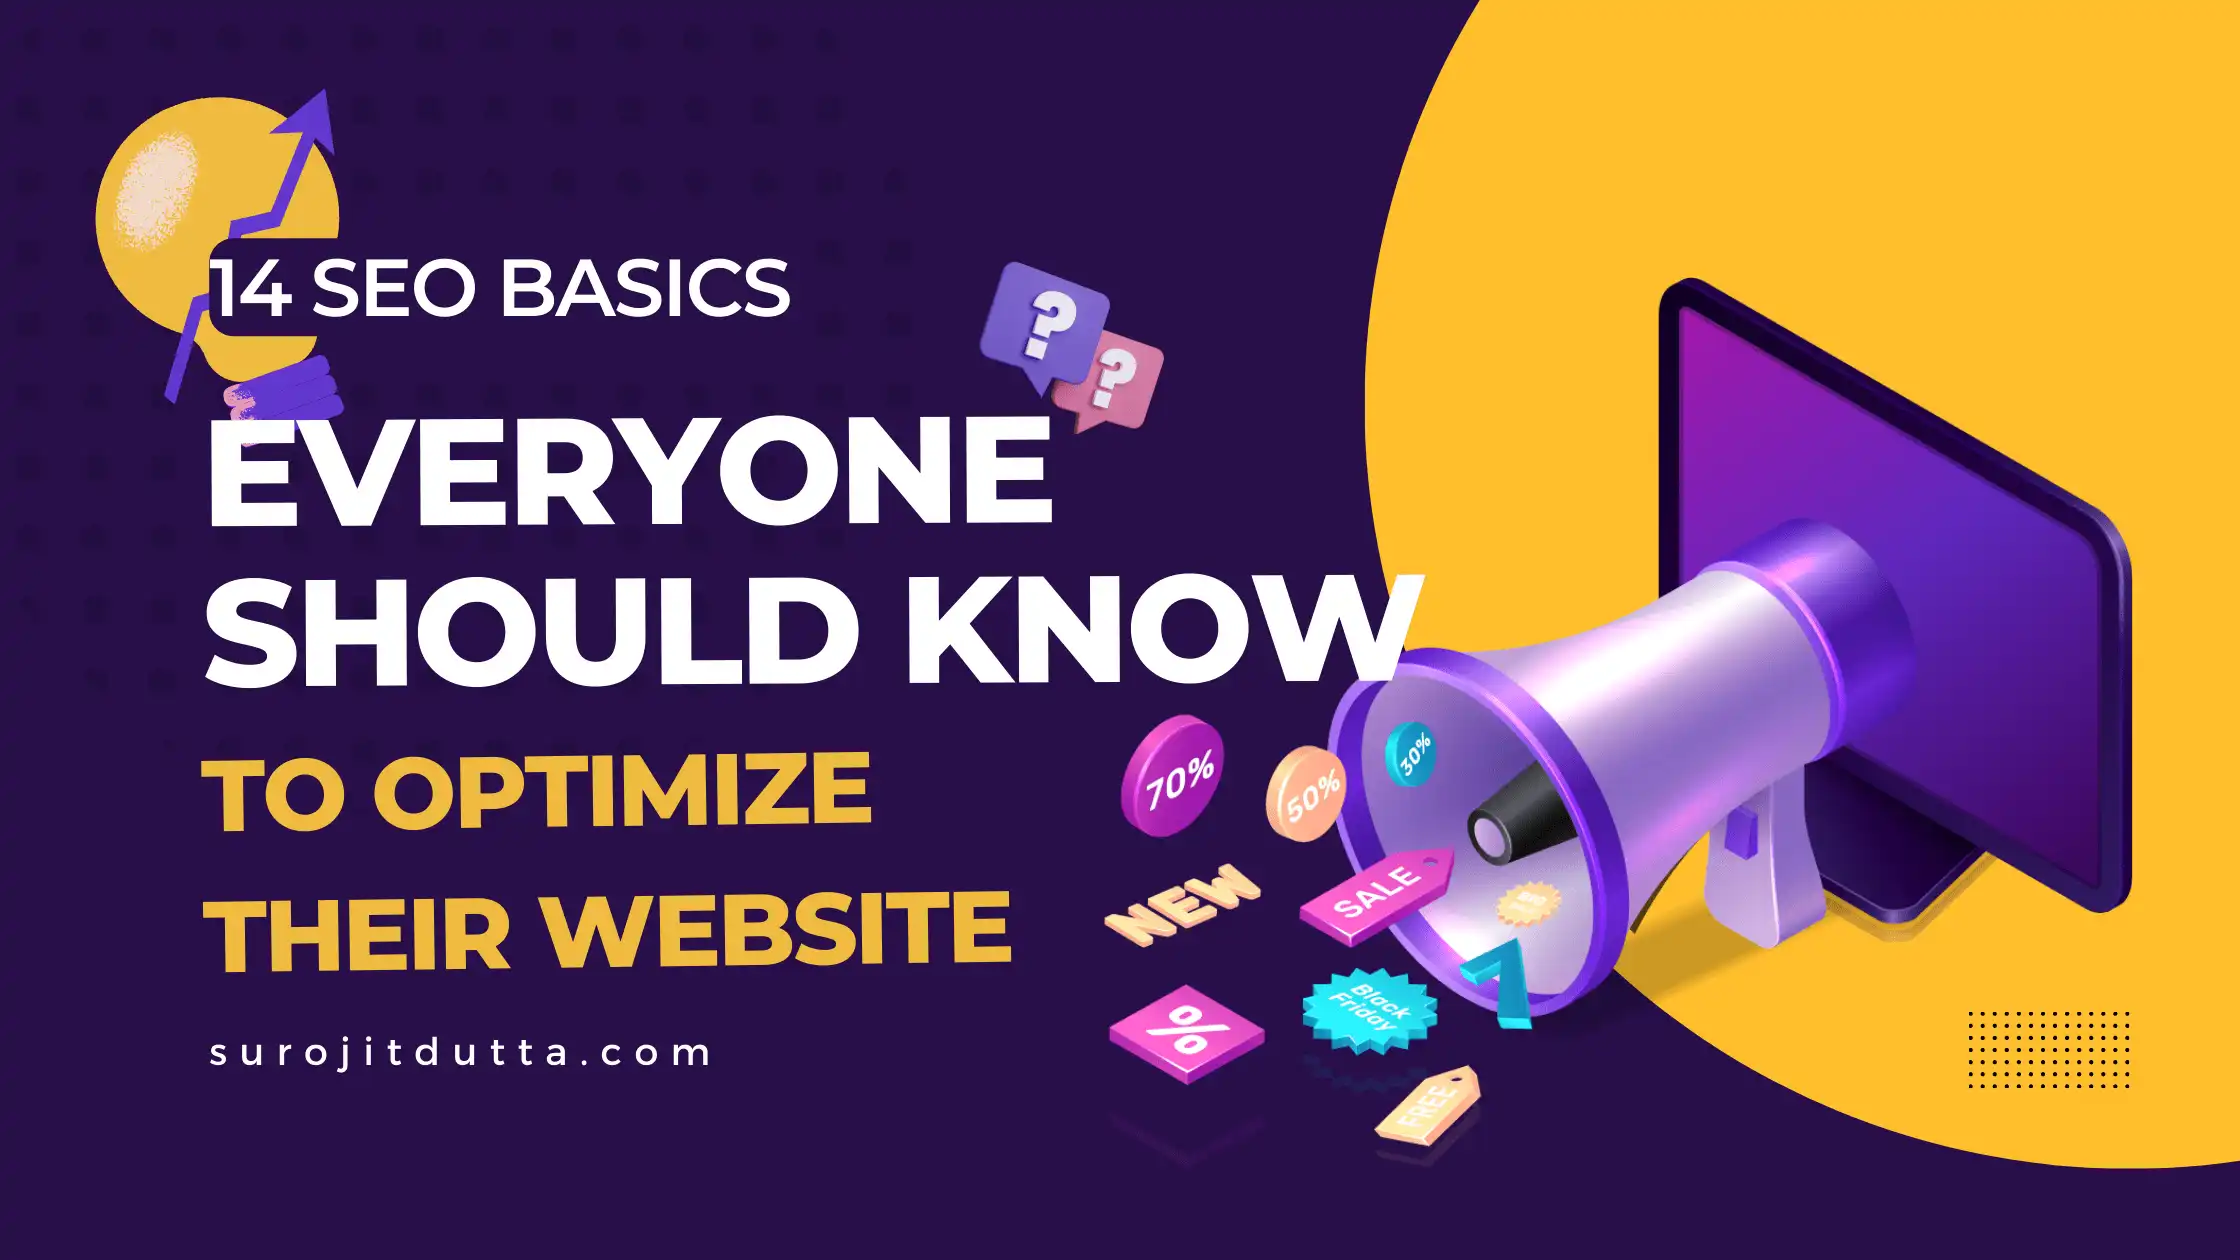 14 SEO Basics Everyone Should Know to Optimize Their Website